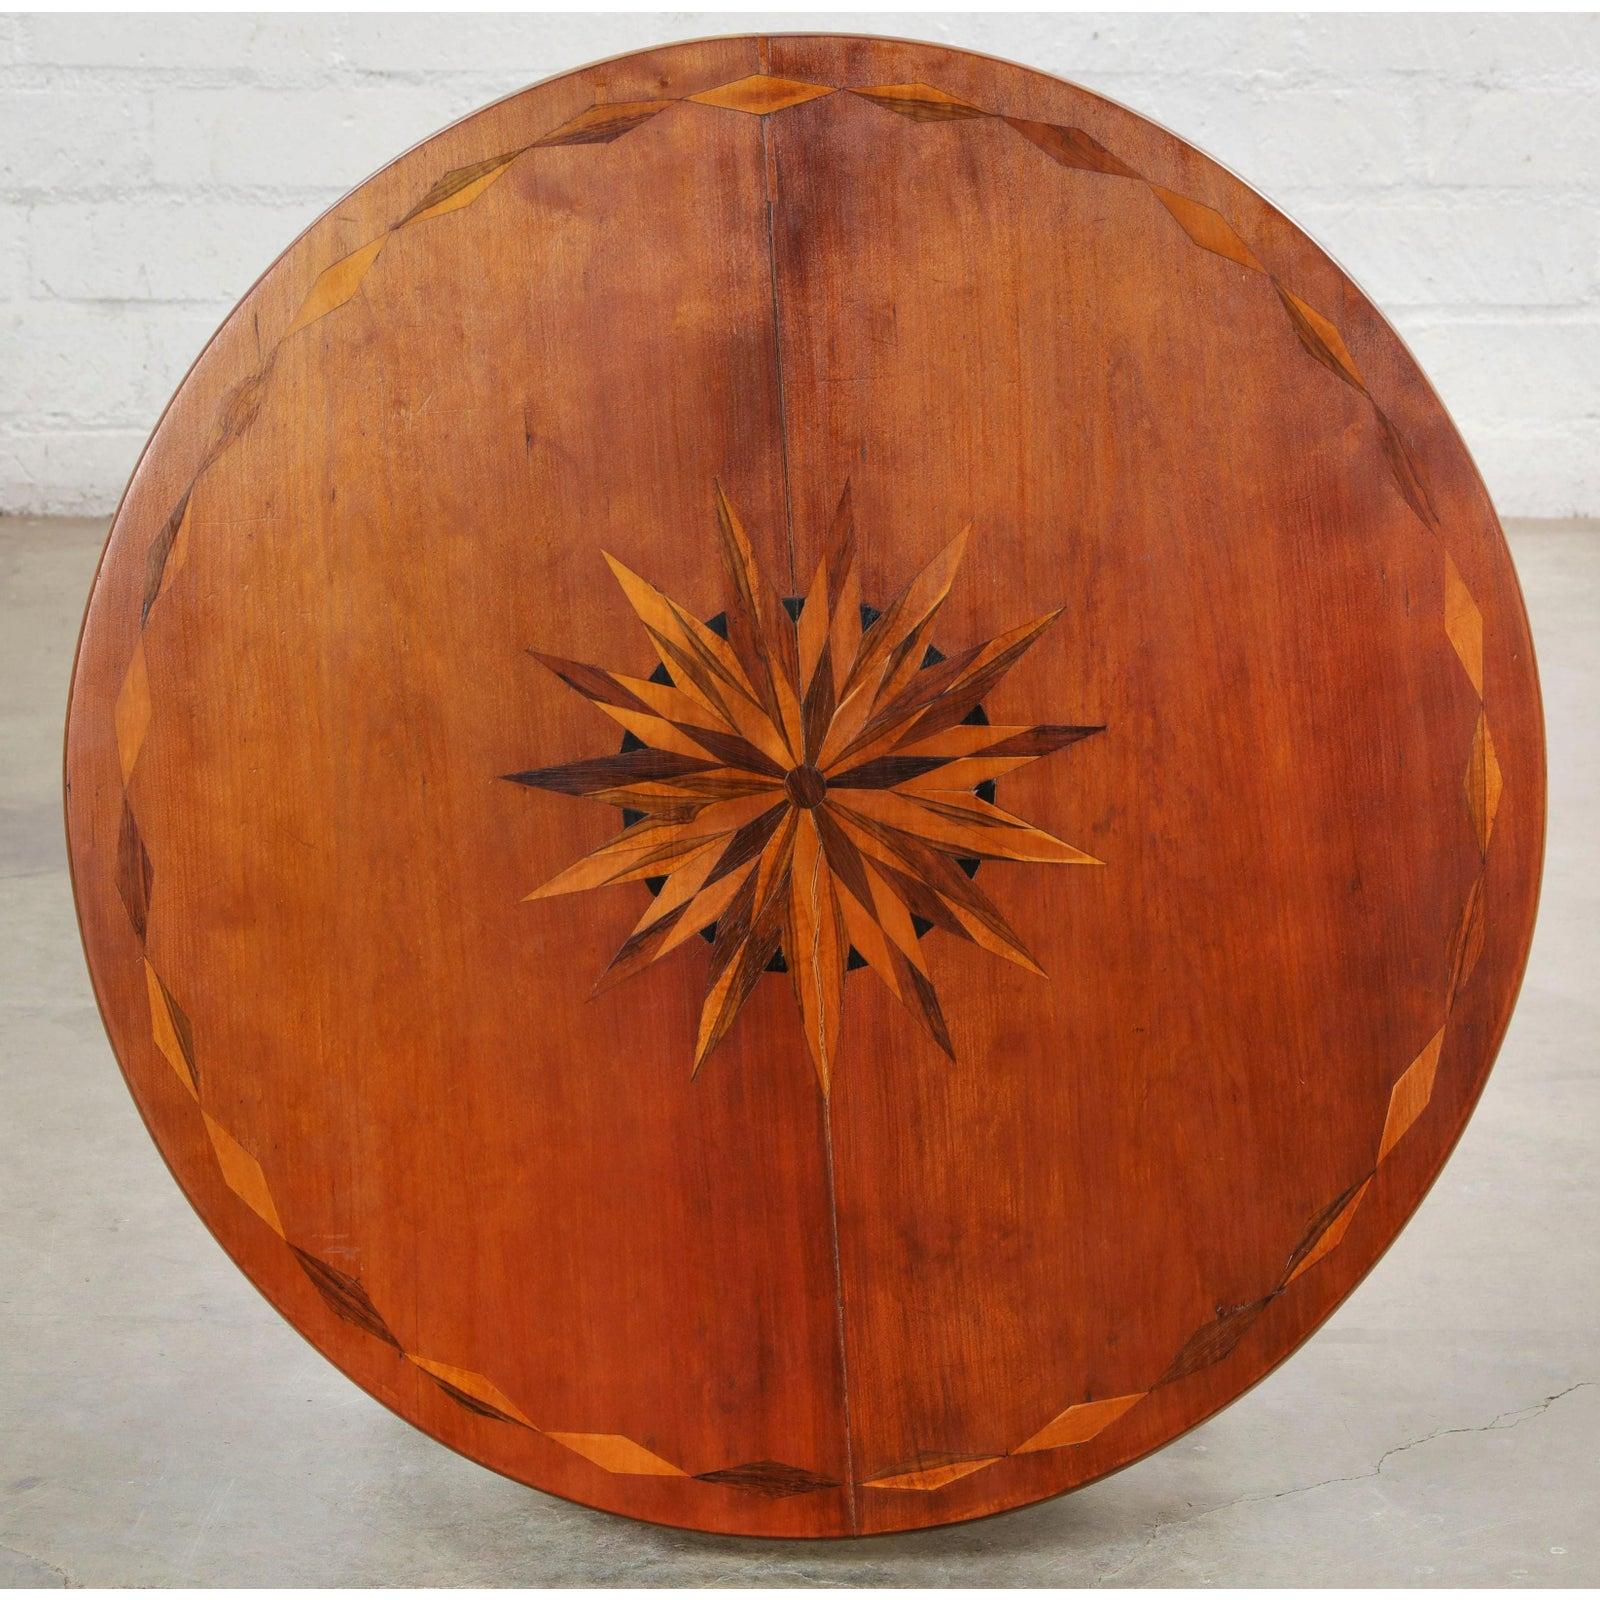 Antique early 19th century American Sheraton Inlaid cherry table

Additional information:
Materials: Cherry Wood
Color: Sienna
Period: early 19th century
Styles: American, Federal
Table Shape: Round
Item Type: Vintage, Antique or